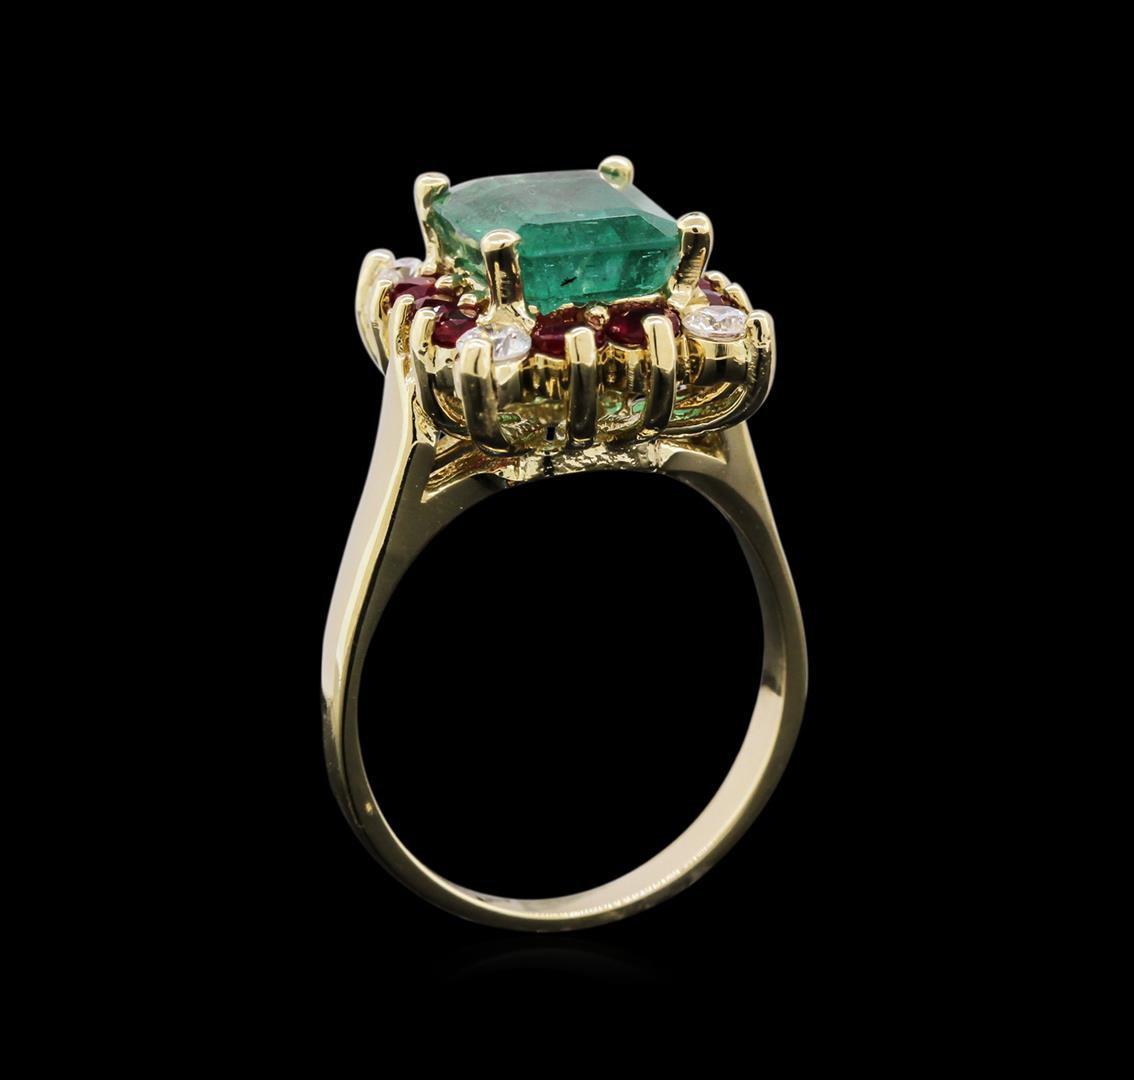 2.75 ctw Emerald, Ruby, and Diamond Ring - 14KT White Gold